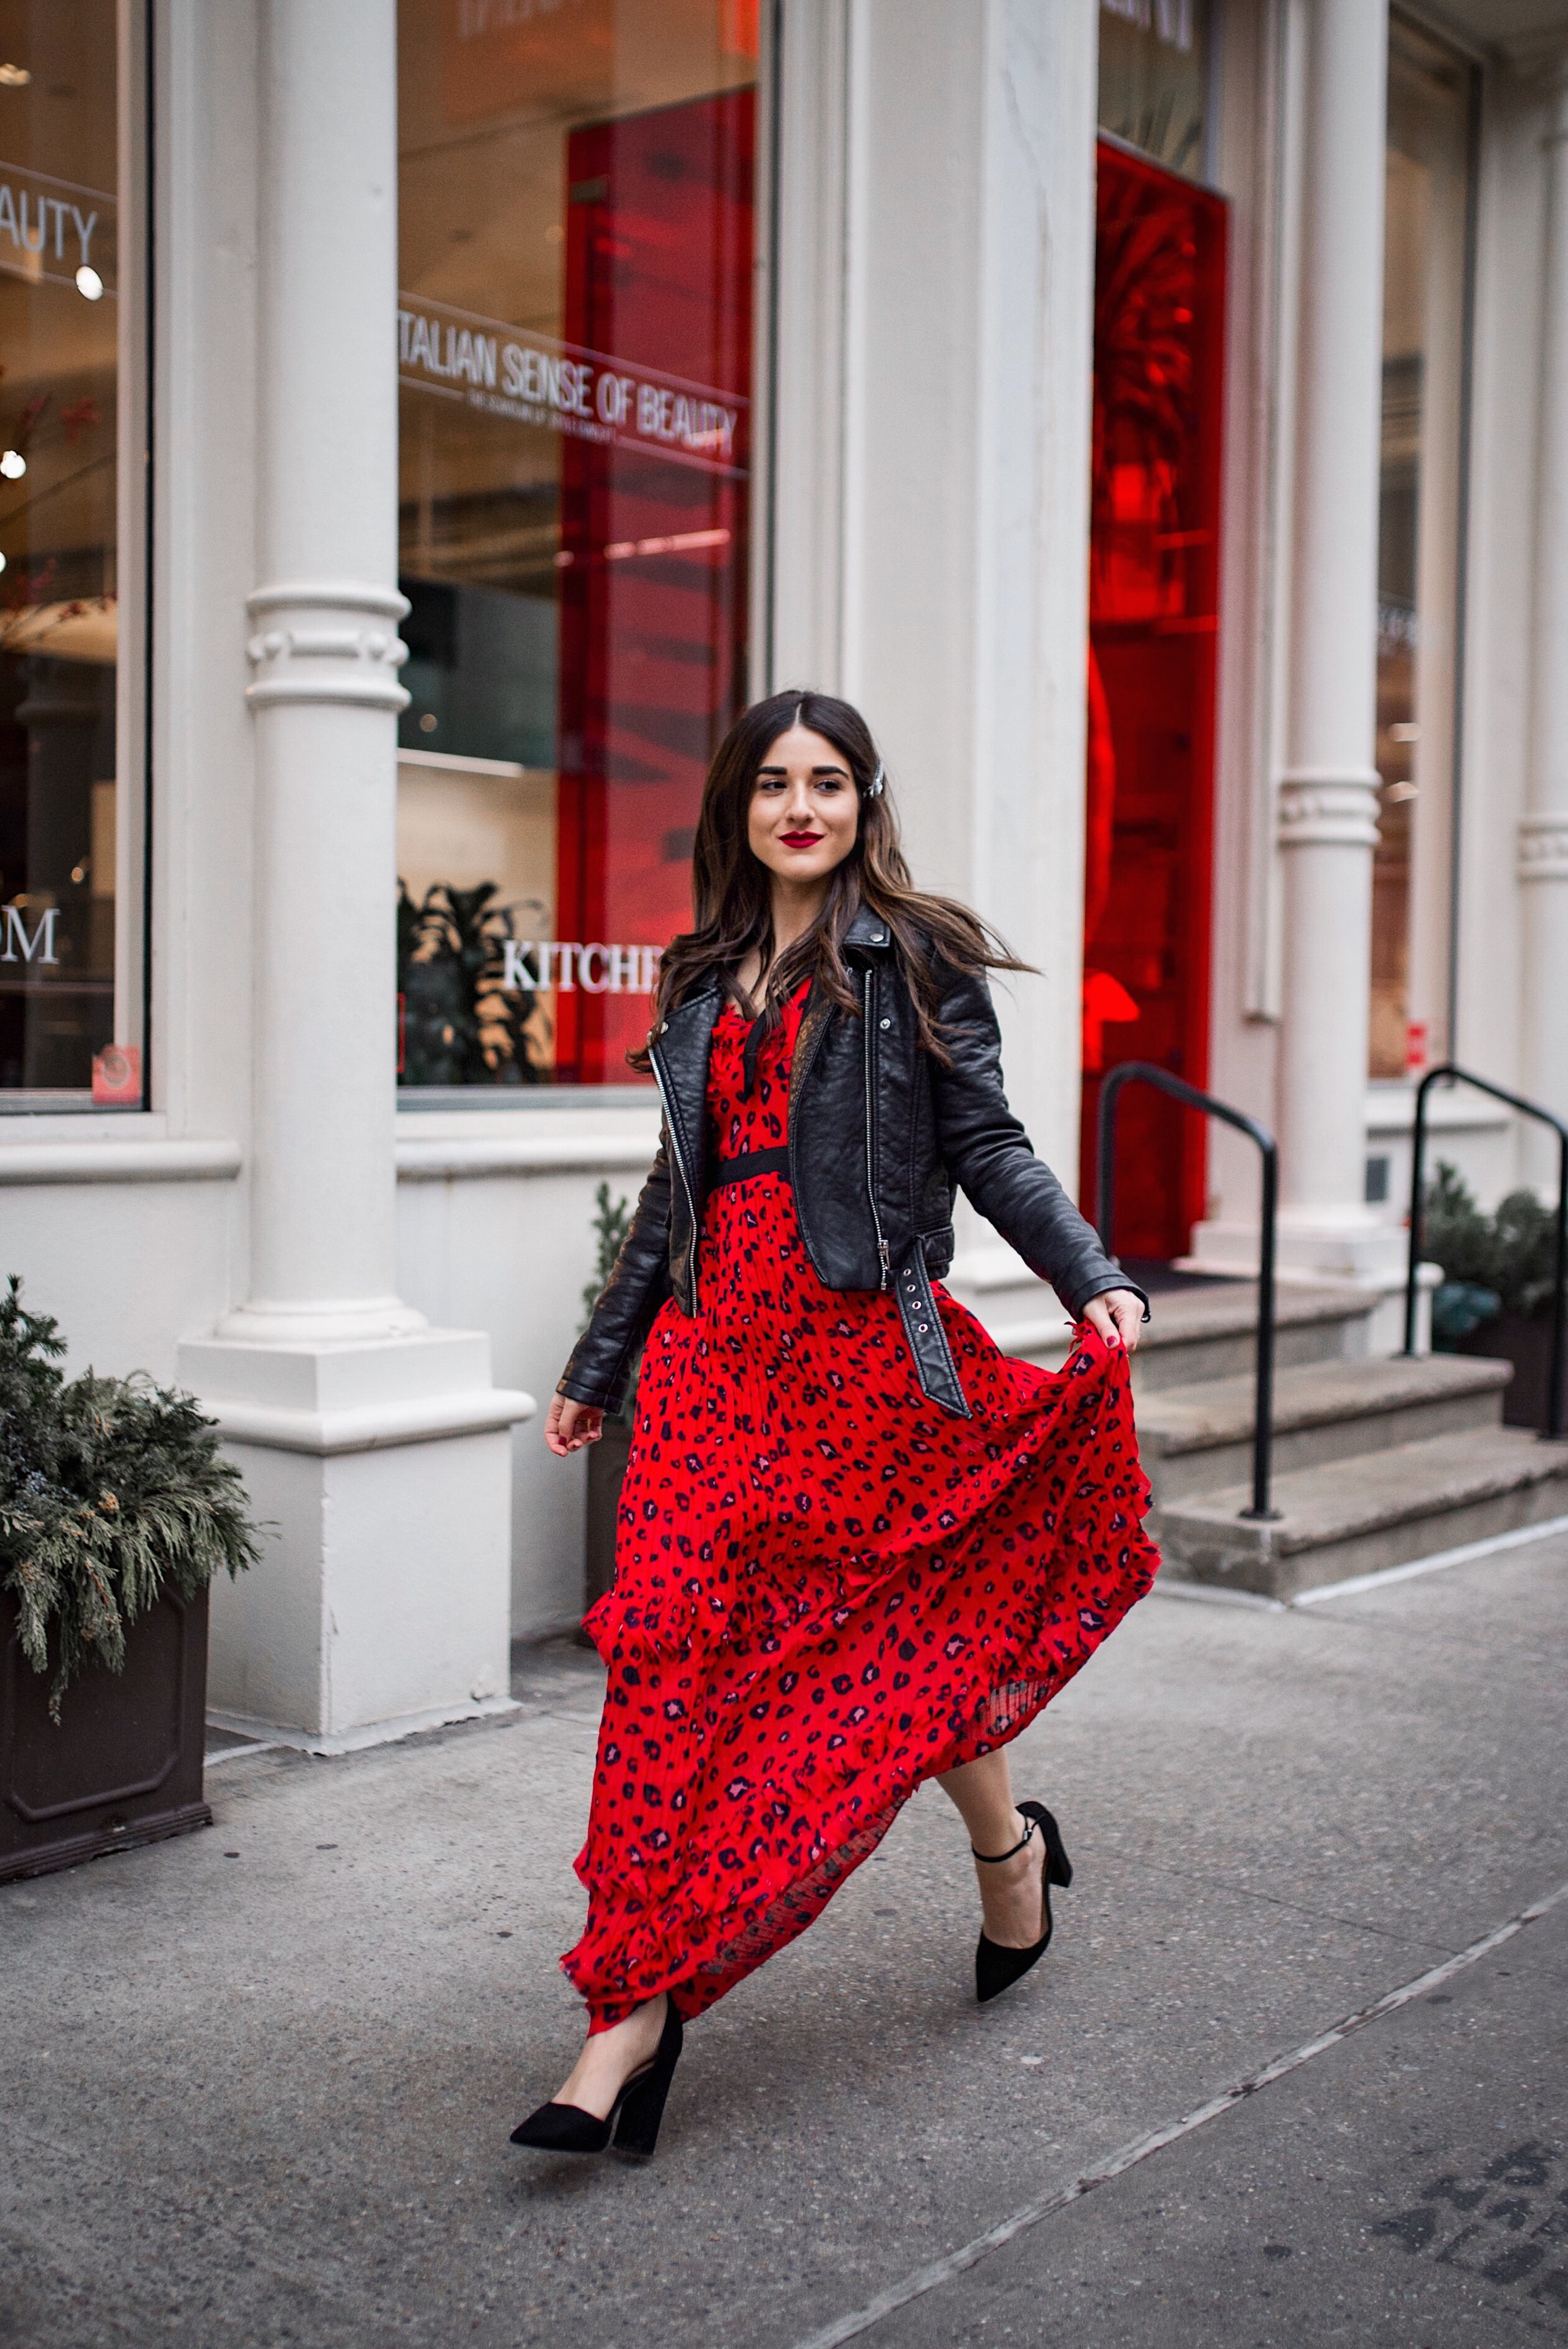 Why Do We Do Any Of This? Red Leopard Dress Moto Jacket Esther Santer Fashion Blog NYC Street Style Blogger Outfit OOTD Trendy Shopping Girl What How To Wear Brunette Long Hairstyle Hair Accesories Monogrammed Jeweled Clips  Nolabel Black Heels ASOS.JPG